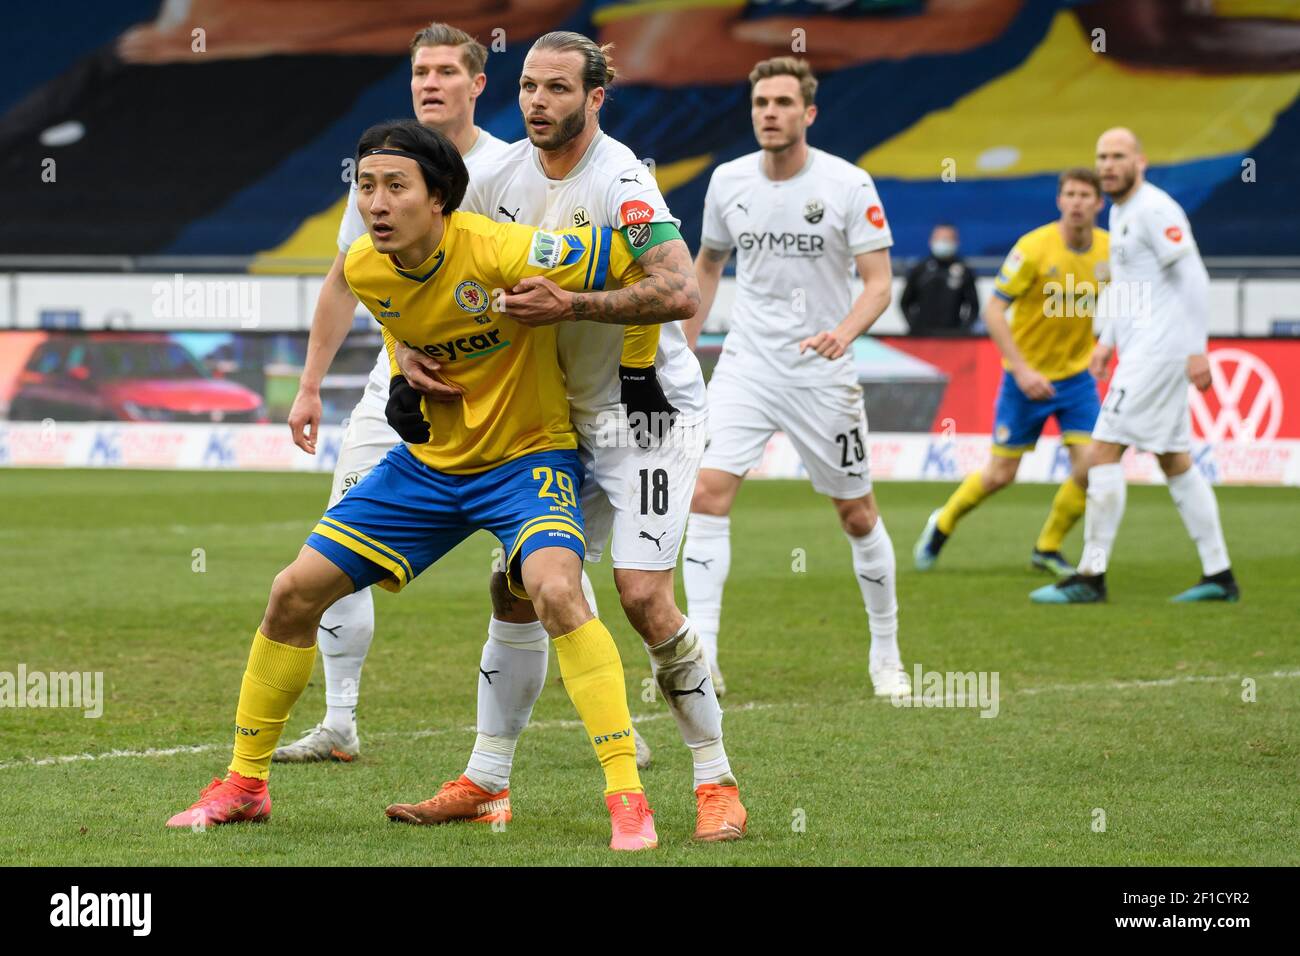 Brunswick, Germany. 07th Mar, 2021. Football: 2. Bundesliga, Eintracht Braunschweig - SV Sandhausen, Matchday 24 at Eintracht-Stadion. Braunschweig striker Dong-Won Ji (l) plays against Sandhausen defender Dennis Diekmeier. Credit: Swen Pförtner/dpa - IMPORTANT NOTE: In accordance with the regulations of the DFL Deutsche Fußball Liga and/or the DFB Deutscher Fußball-Bund, it is prohibited to use or have used photographs taken in the stadium and/or of the match in the form of sequence pictures and/or video-like photo series./dpa/Alamy Live News Stock Photo